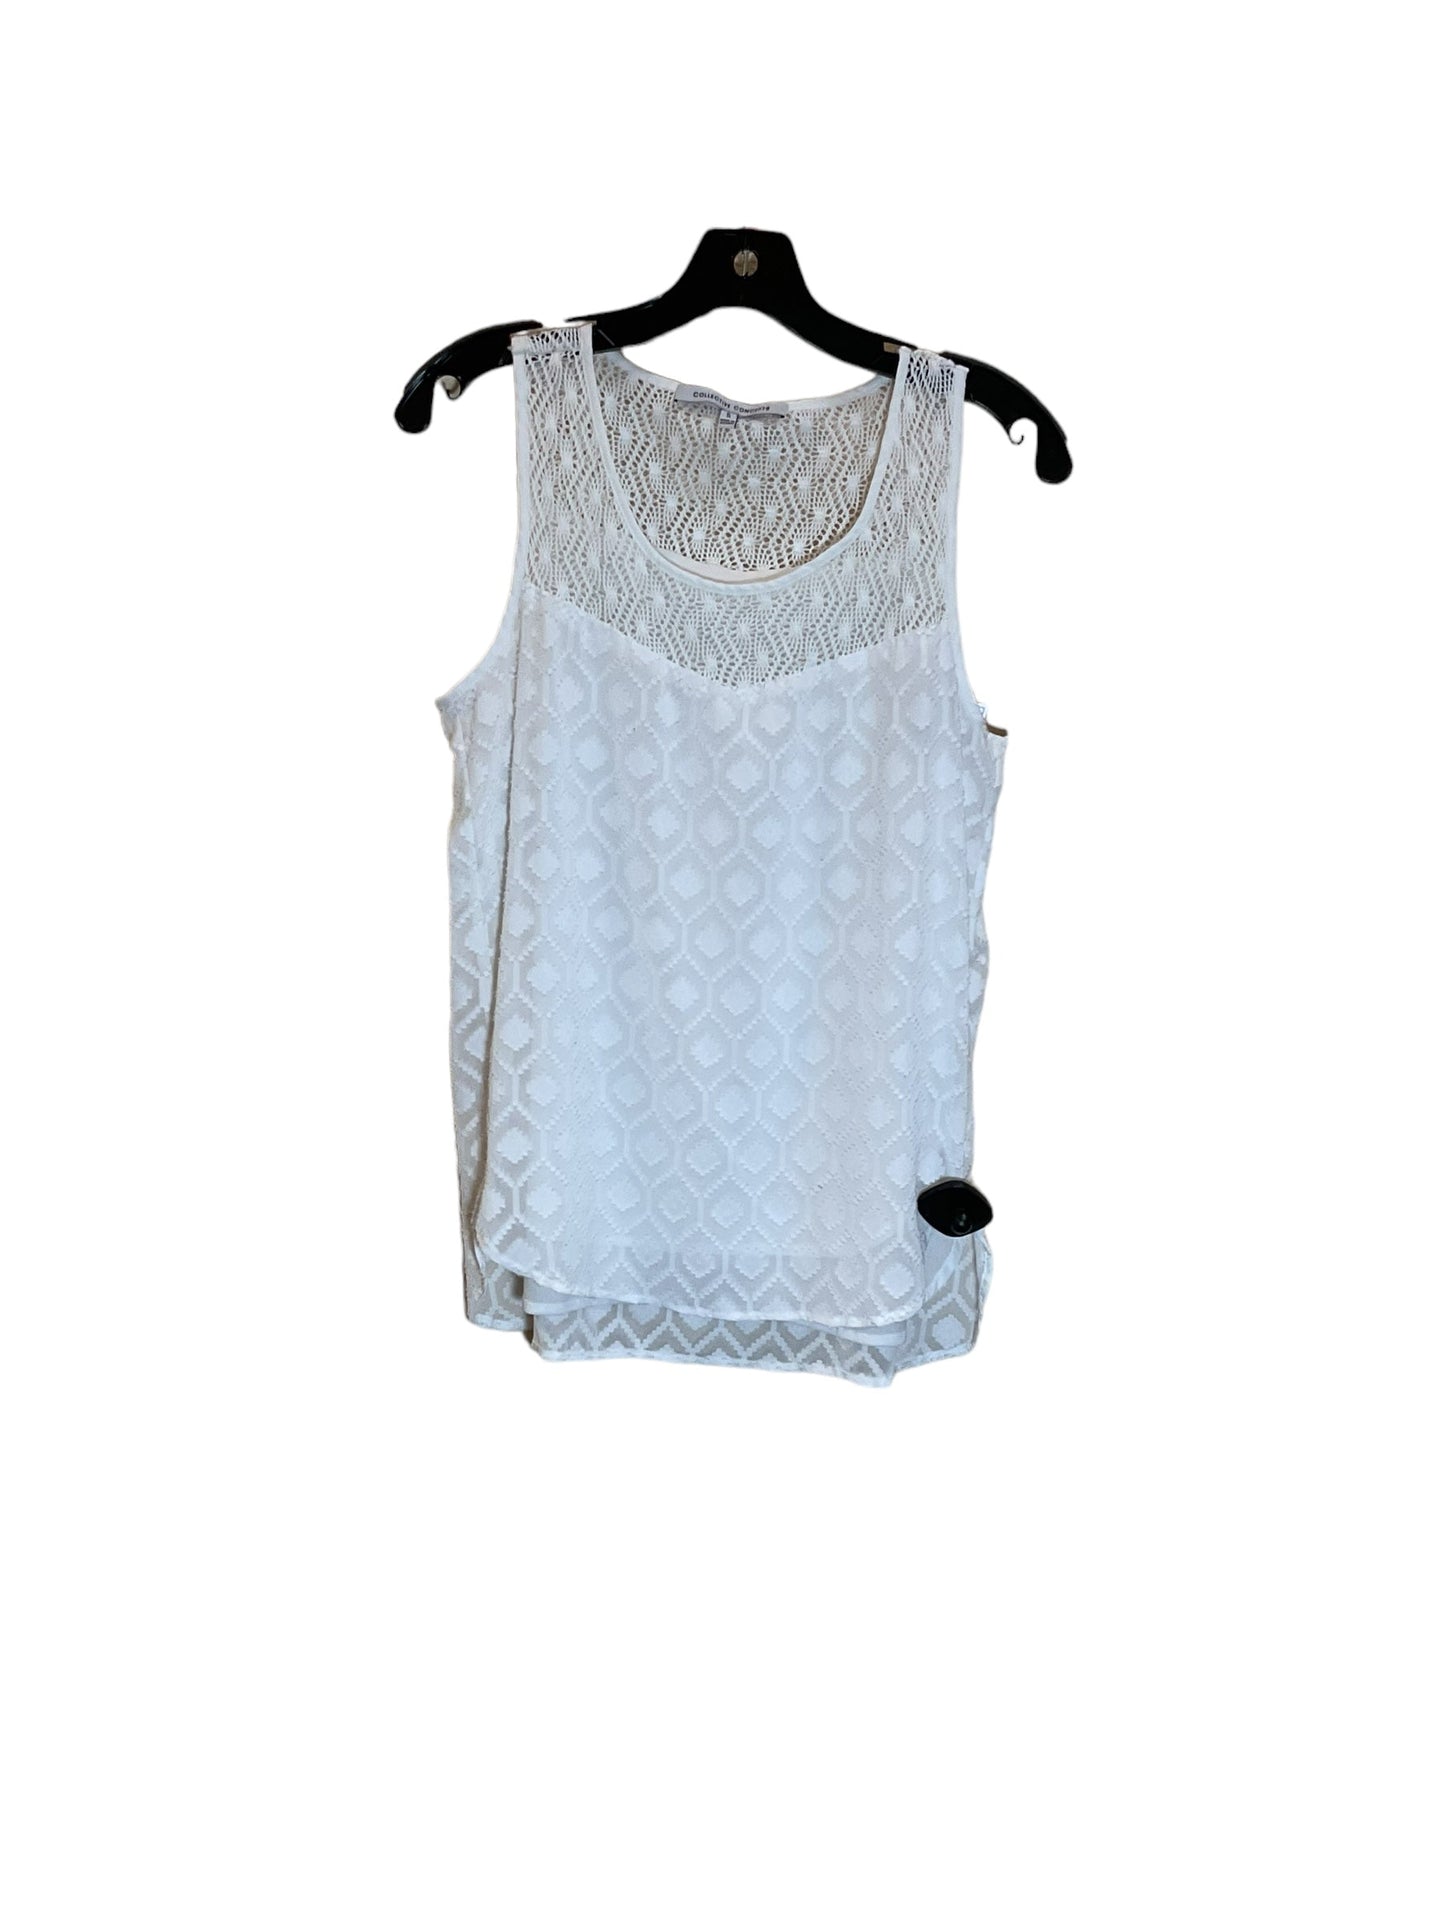 White Top Sleeveless Collective Concepts, Size S